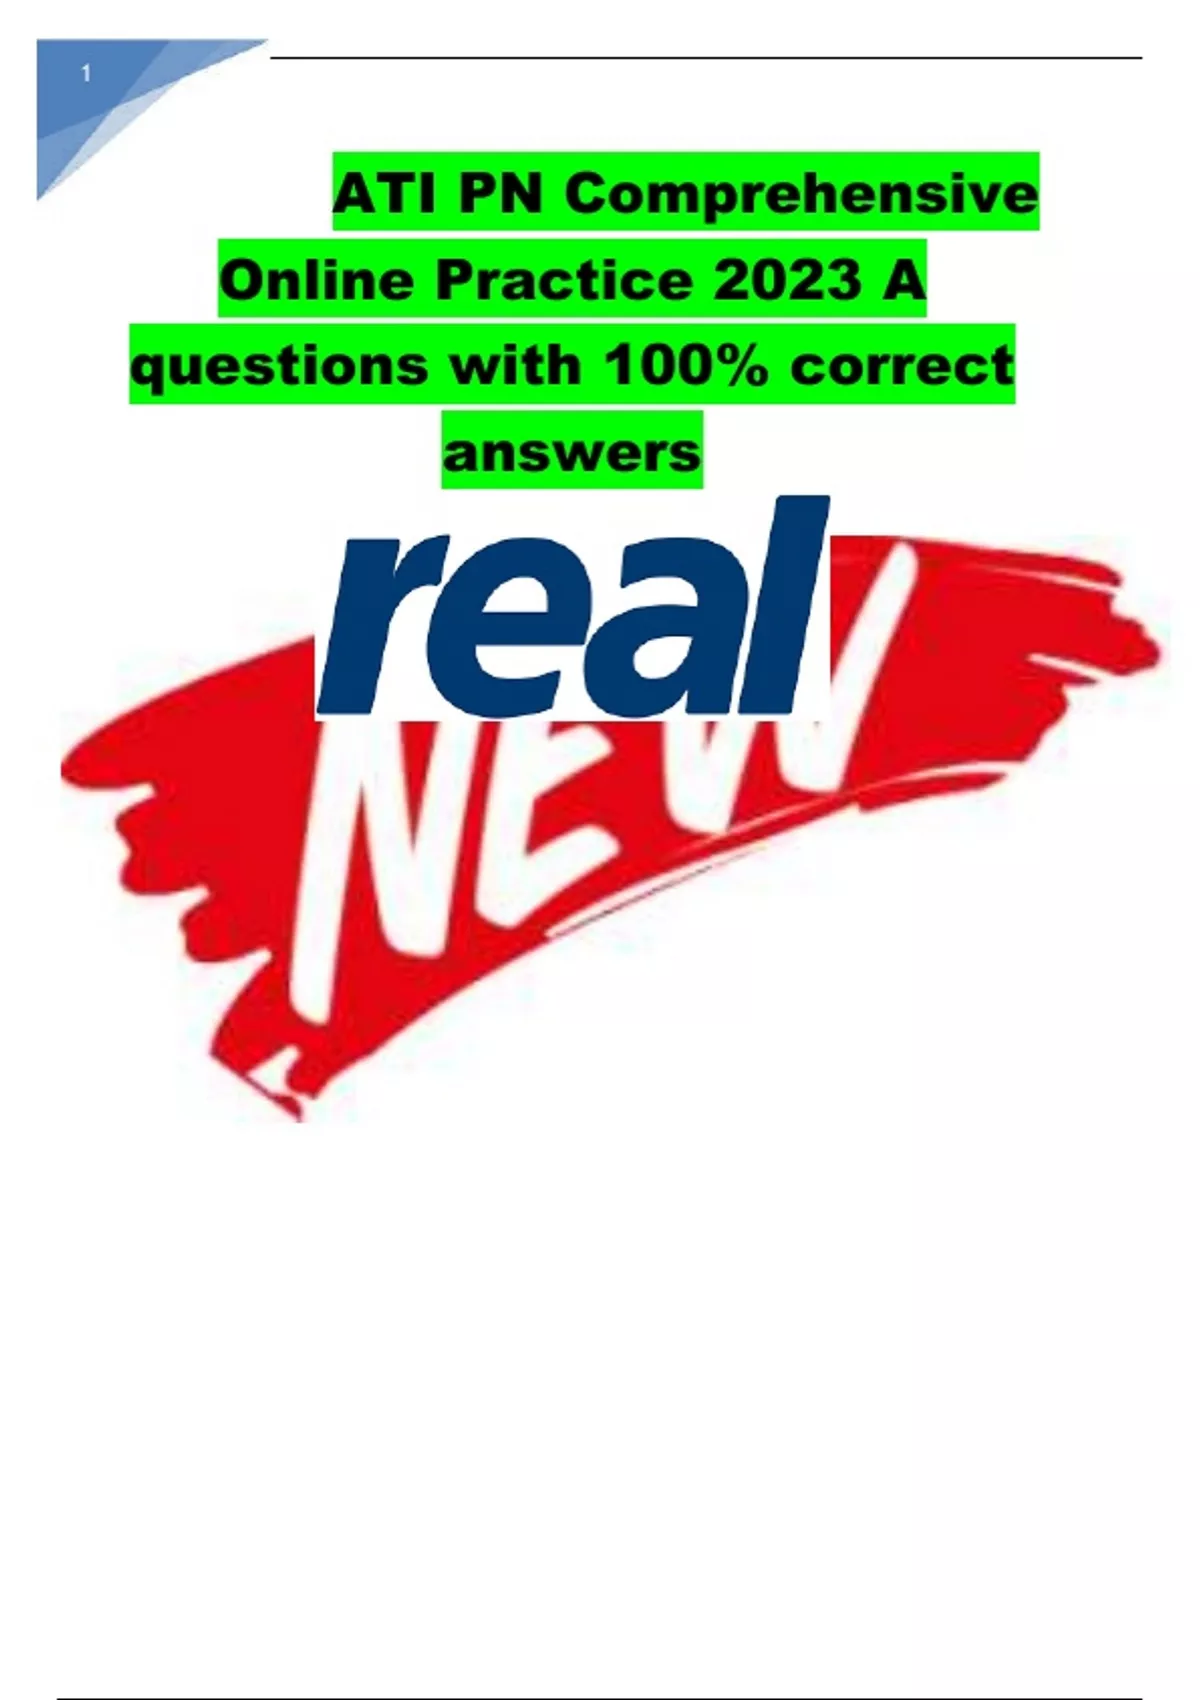 ATI PN Comprehensive Online Practice 2023 A questions with 100 correct